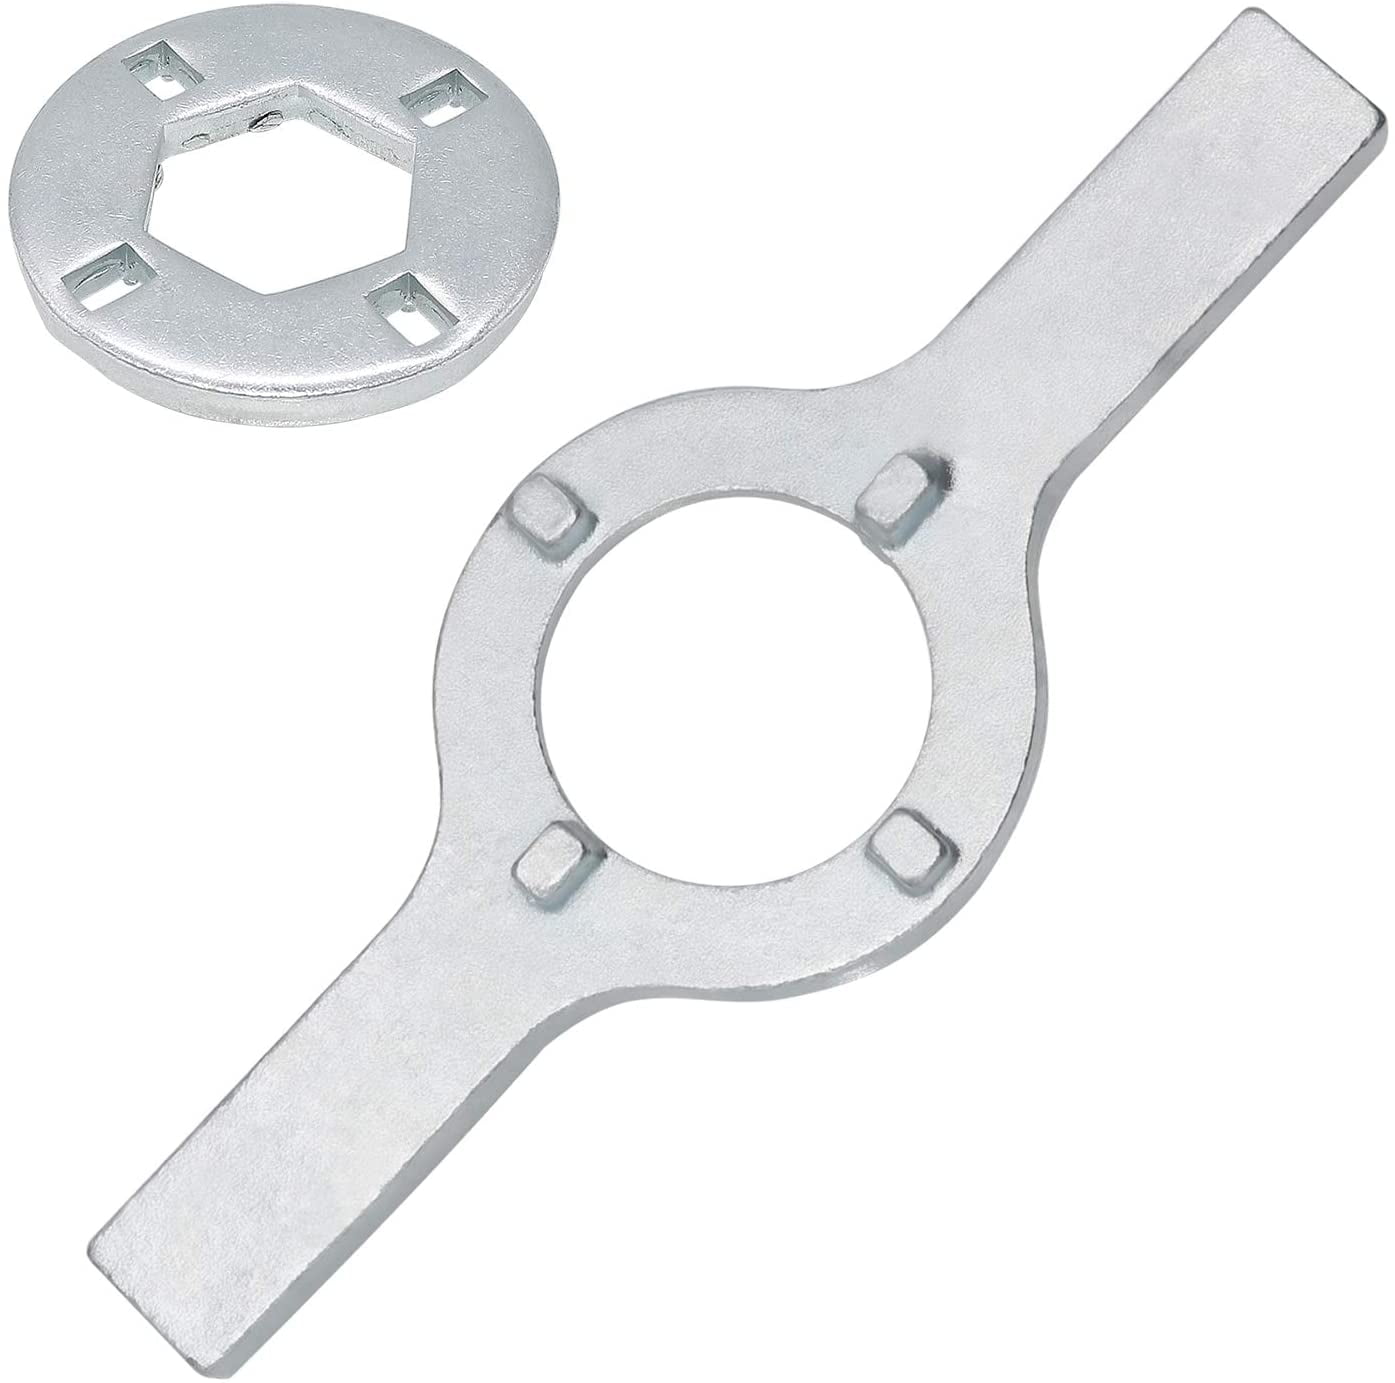 TB123A HD Tub Nut Spanner Wrench Kenmore / Whirlpool Washer Only 